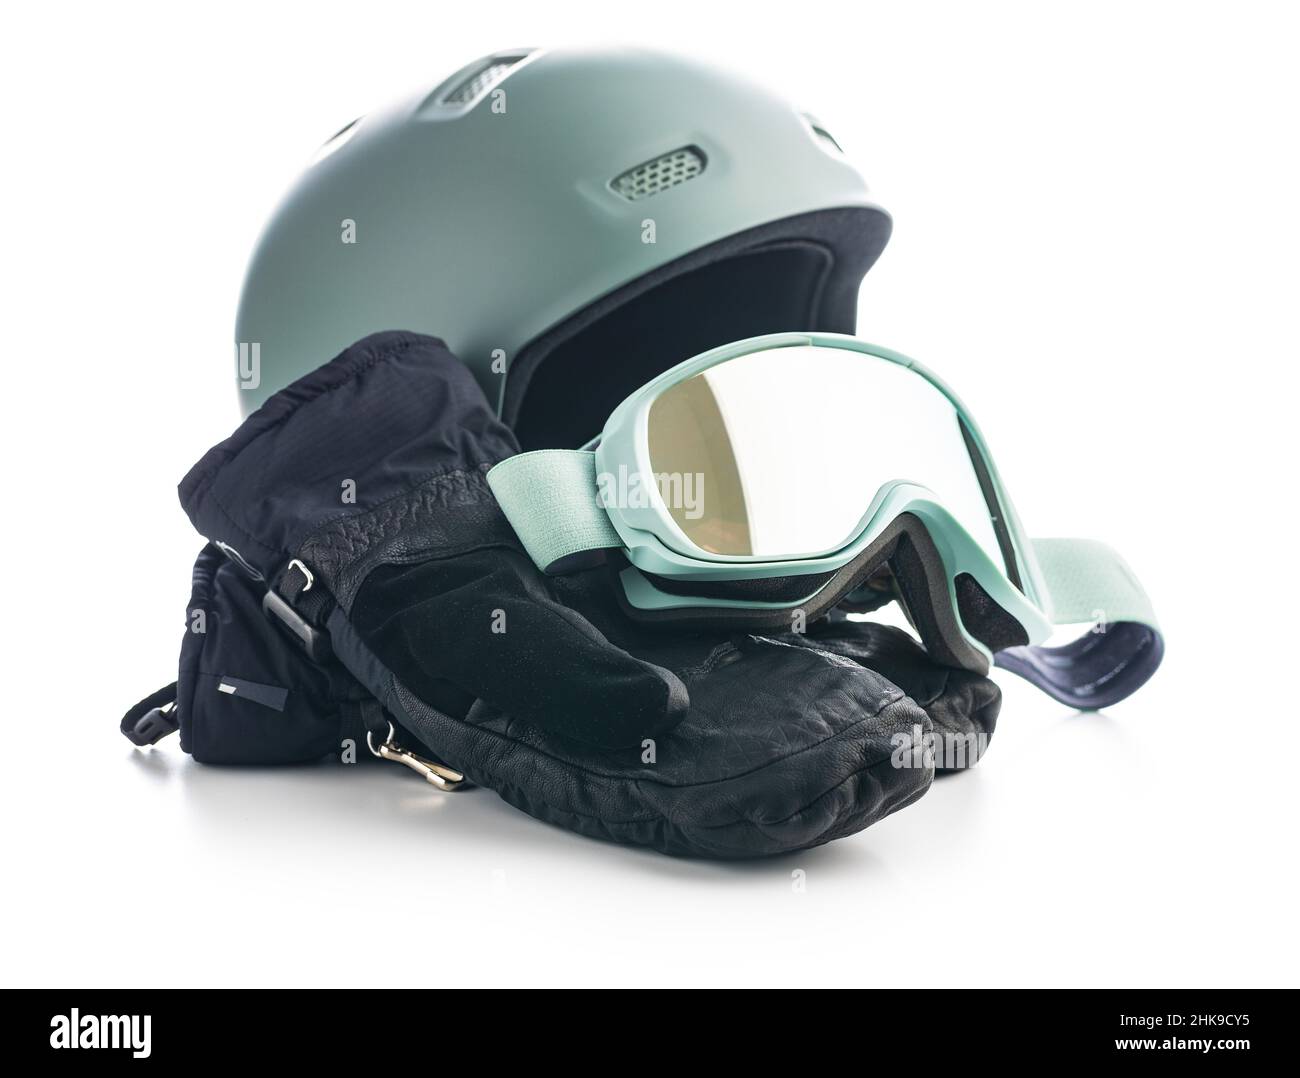 Ski or snowboarding helmet with goggles isolated on a white background. Stock Photo